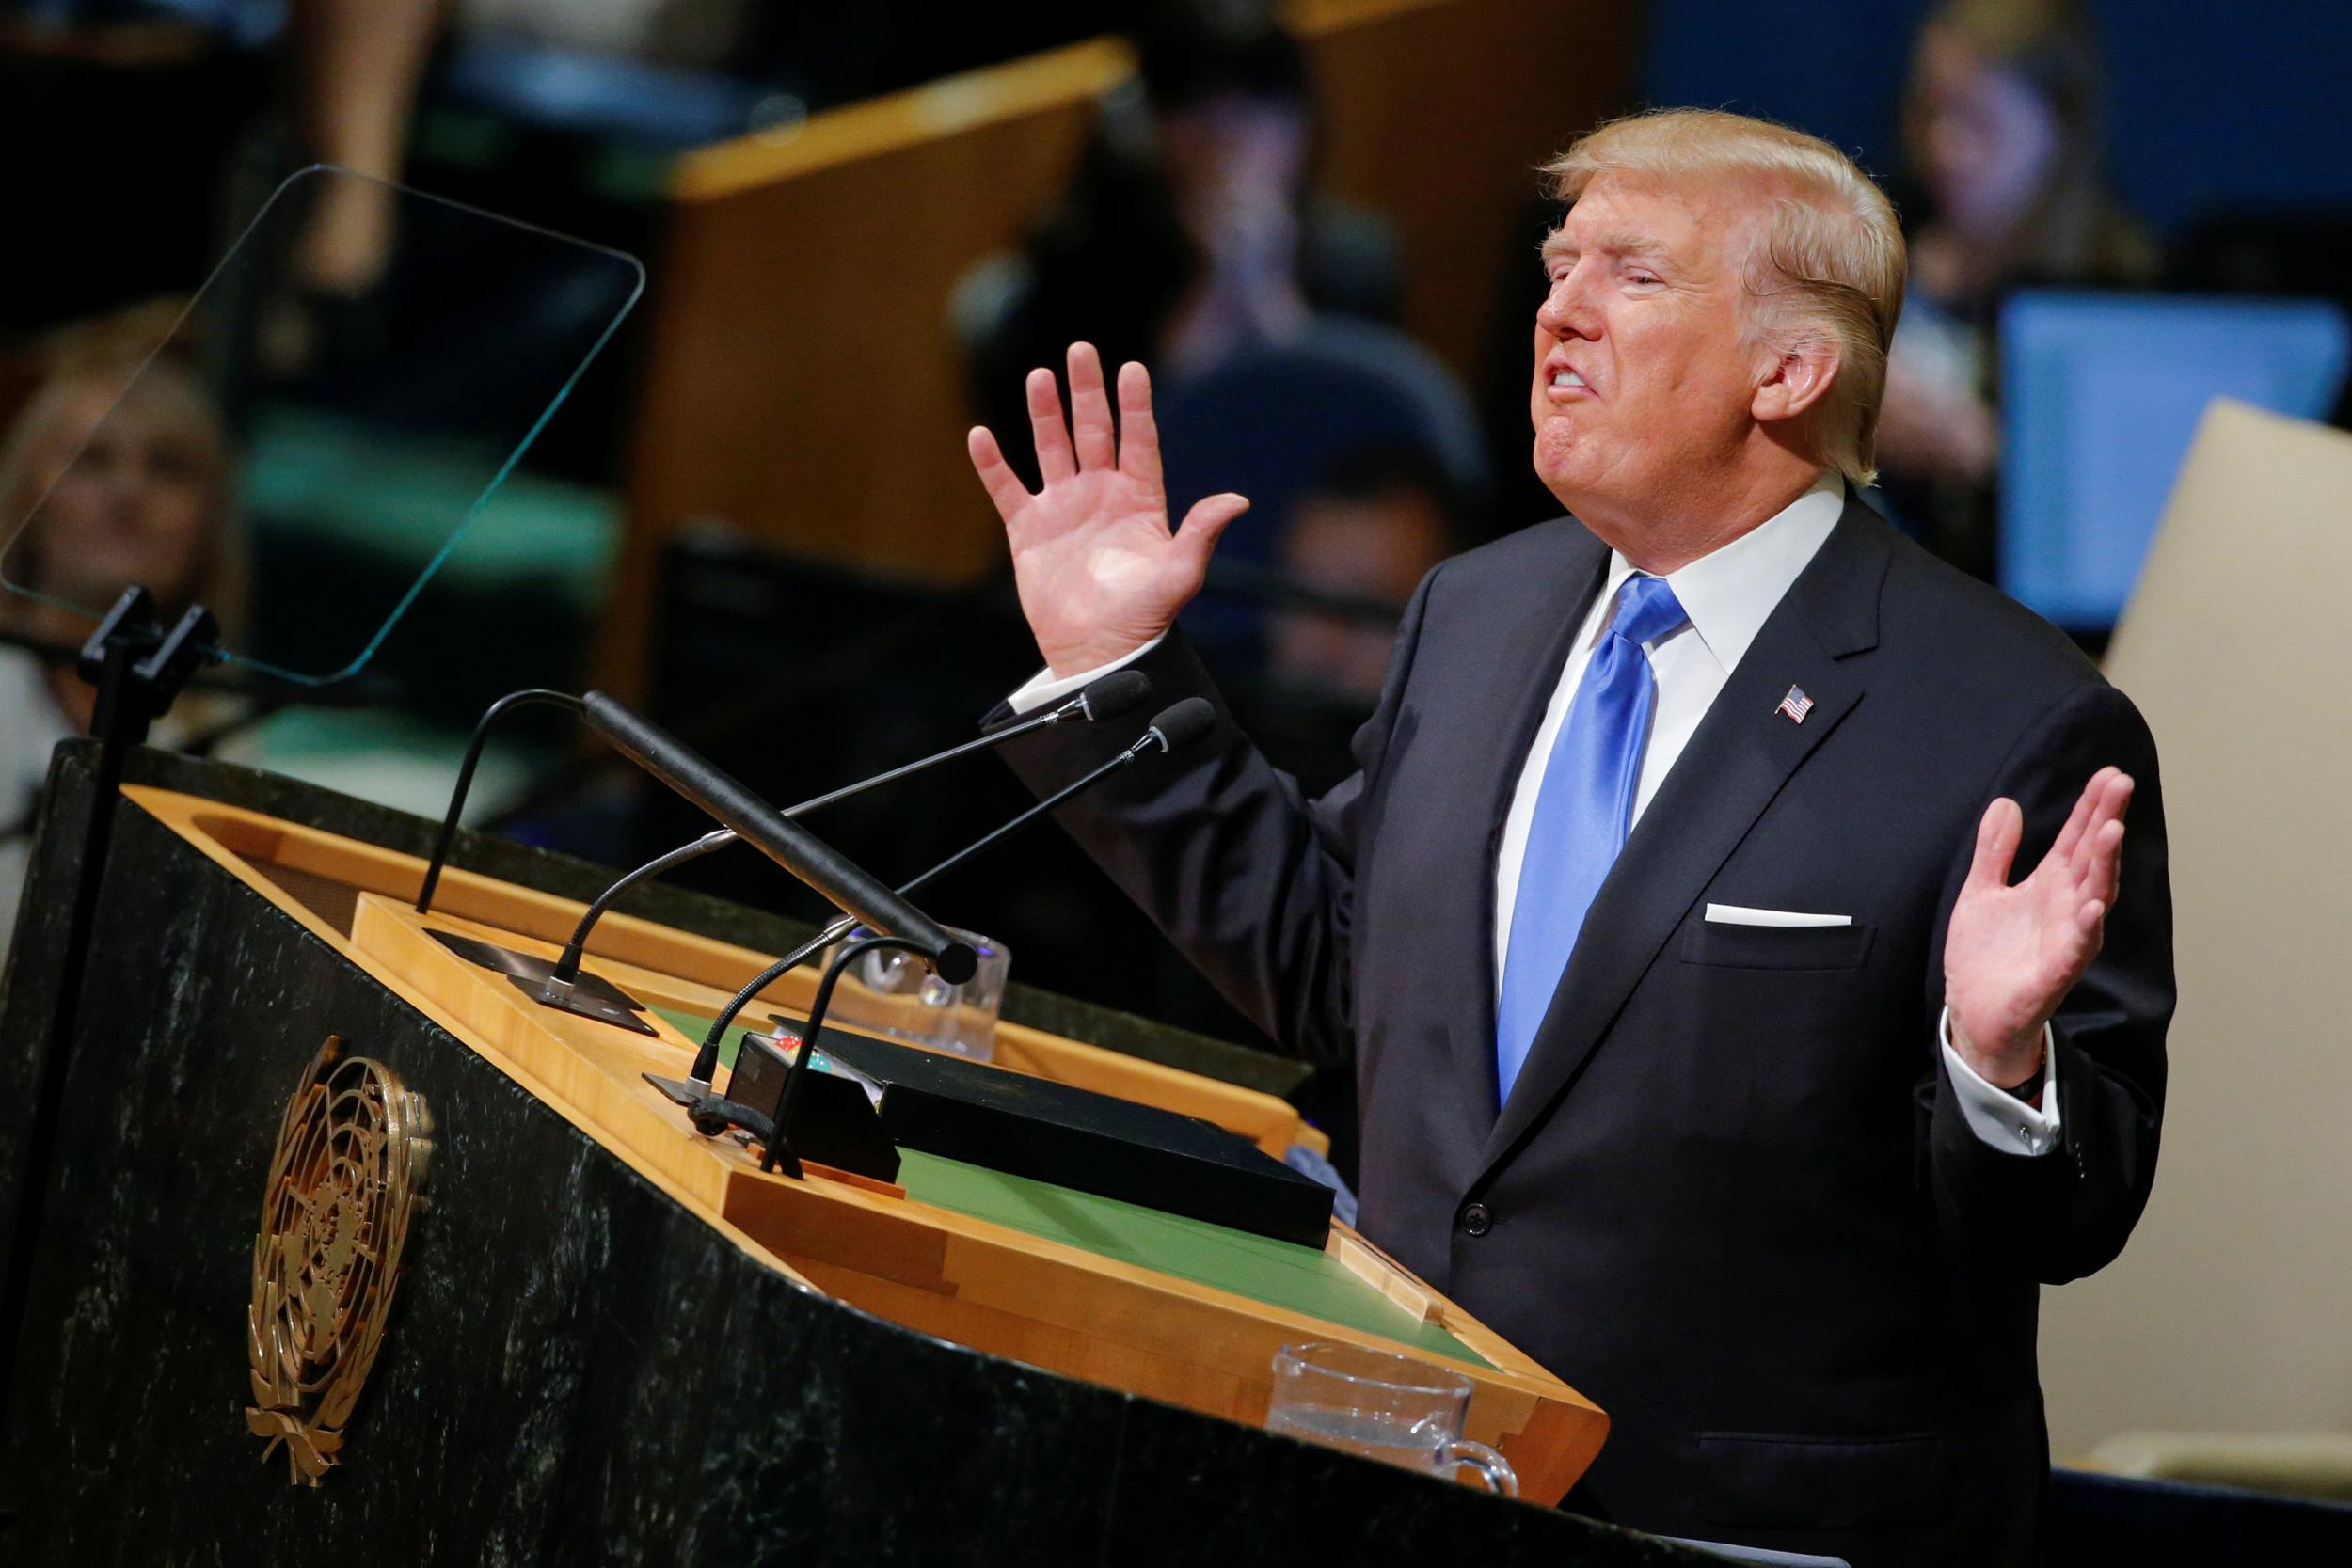 Donald Trump addressing the UN General Assembly